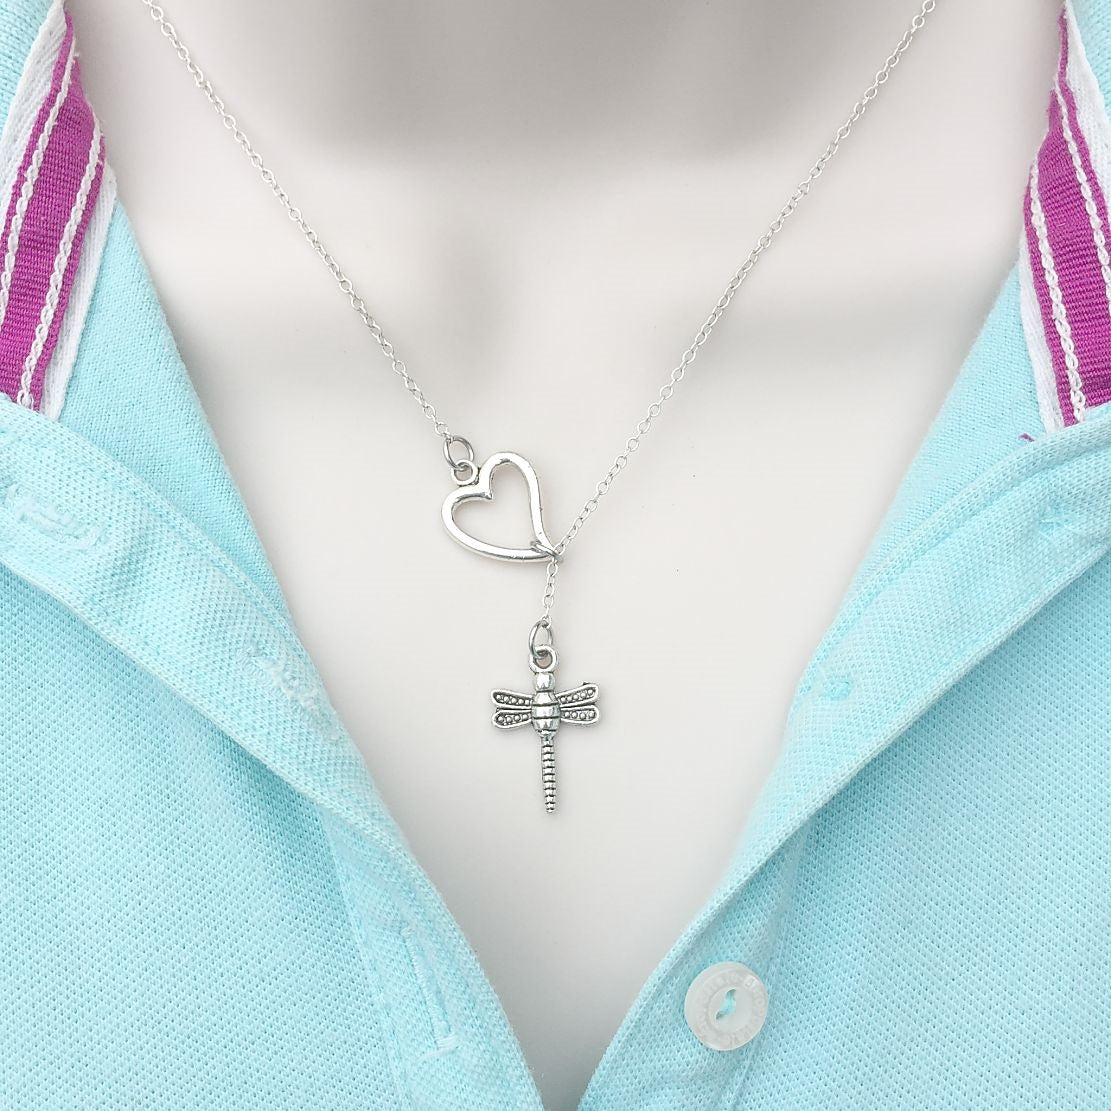 I Love Beautiful Dragonfly Lariat Y Necklace.